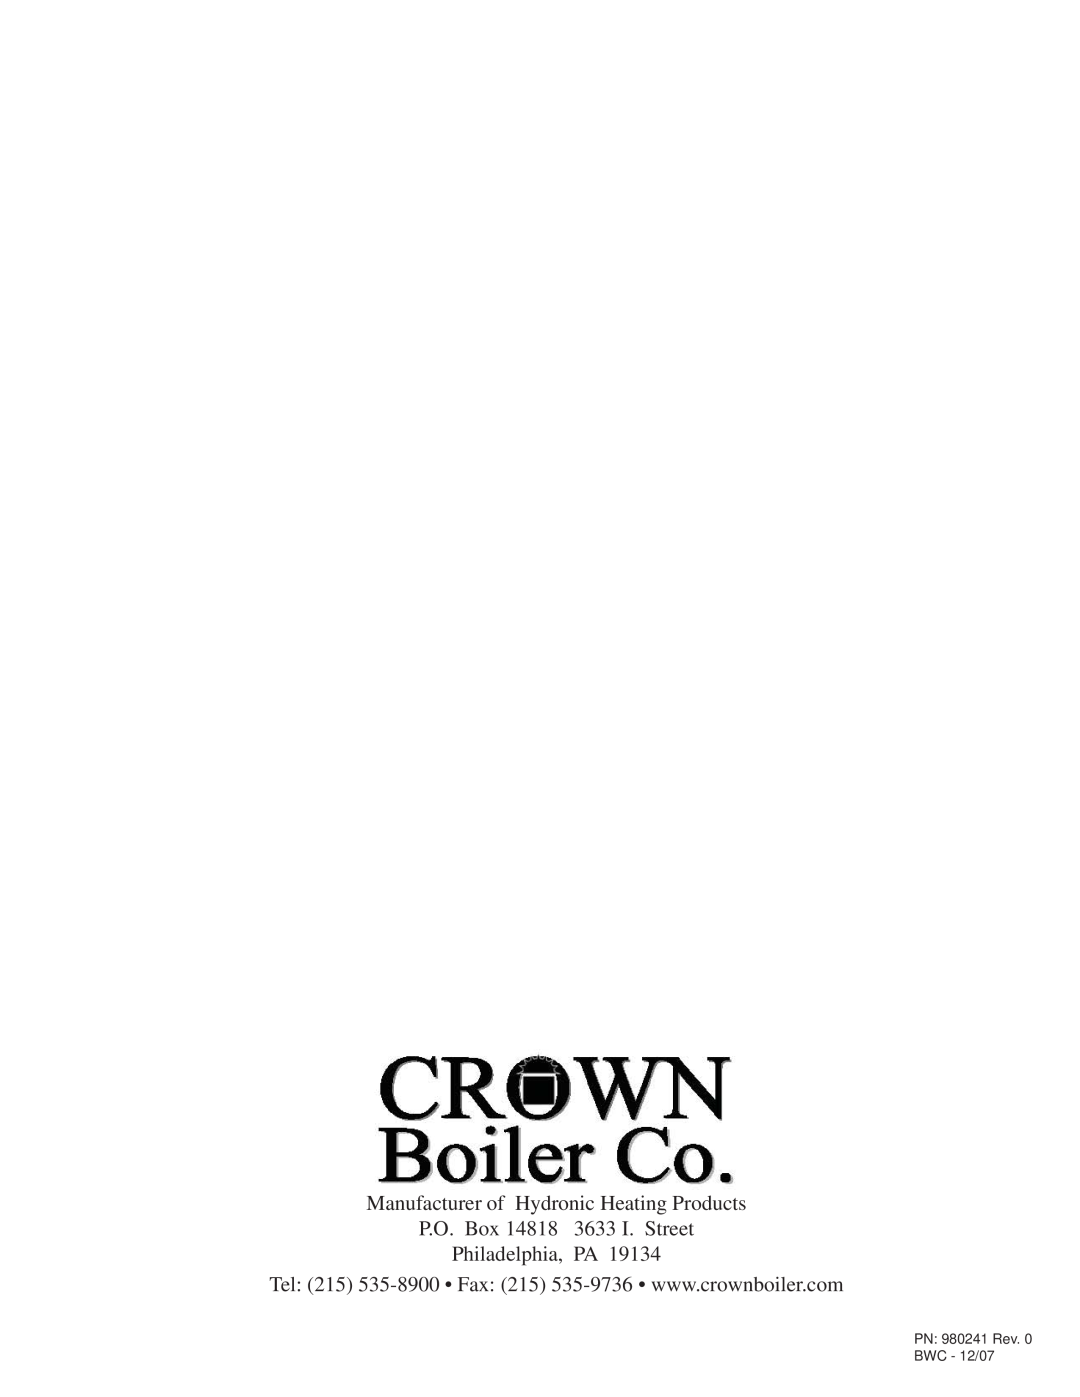 Crown Boiler M600 Manufacturer of Hydronic Heating Products, P.O. Box 14818 3633 I. Street Philadelphia, PA 